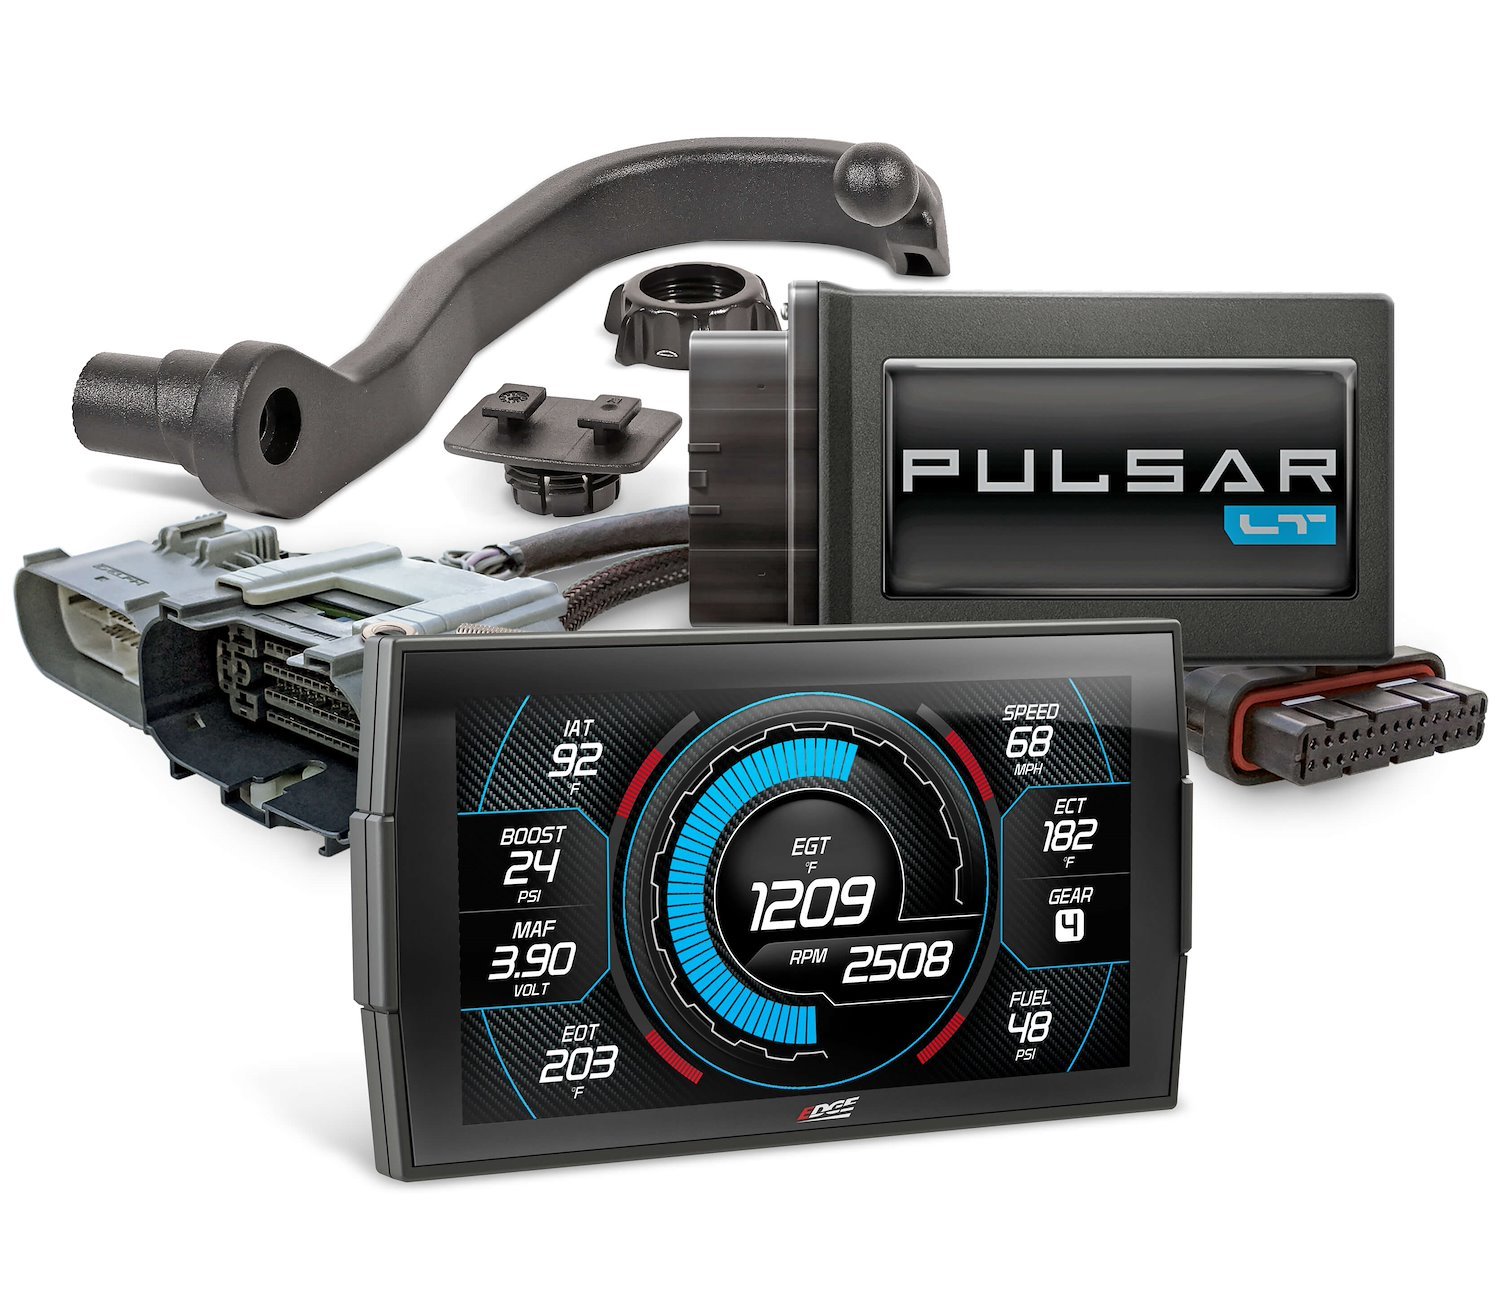 Pulsar LT In-Line Tuning Module + Insight CTS3